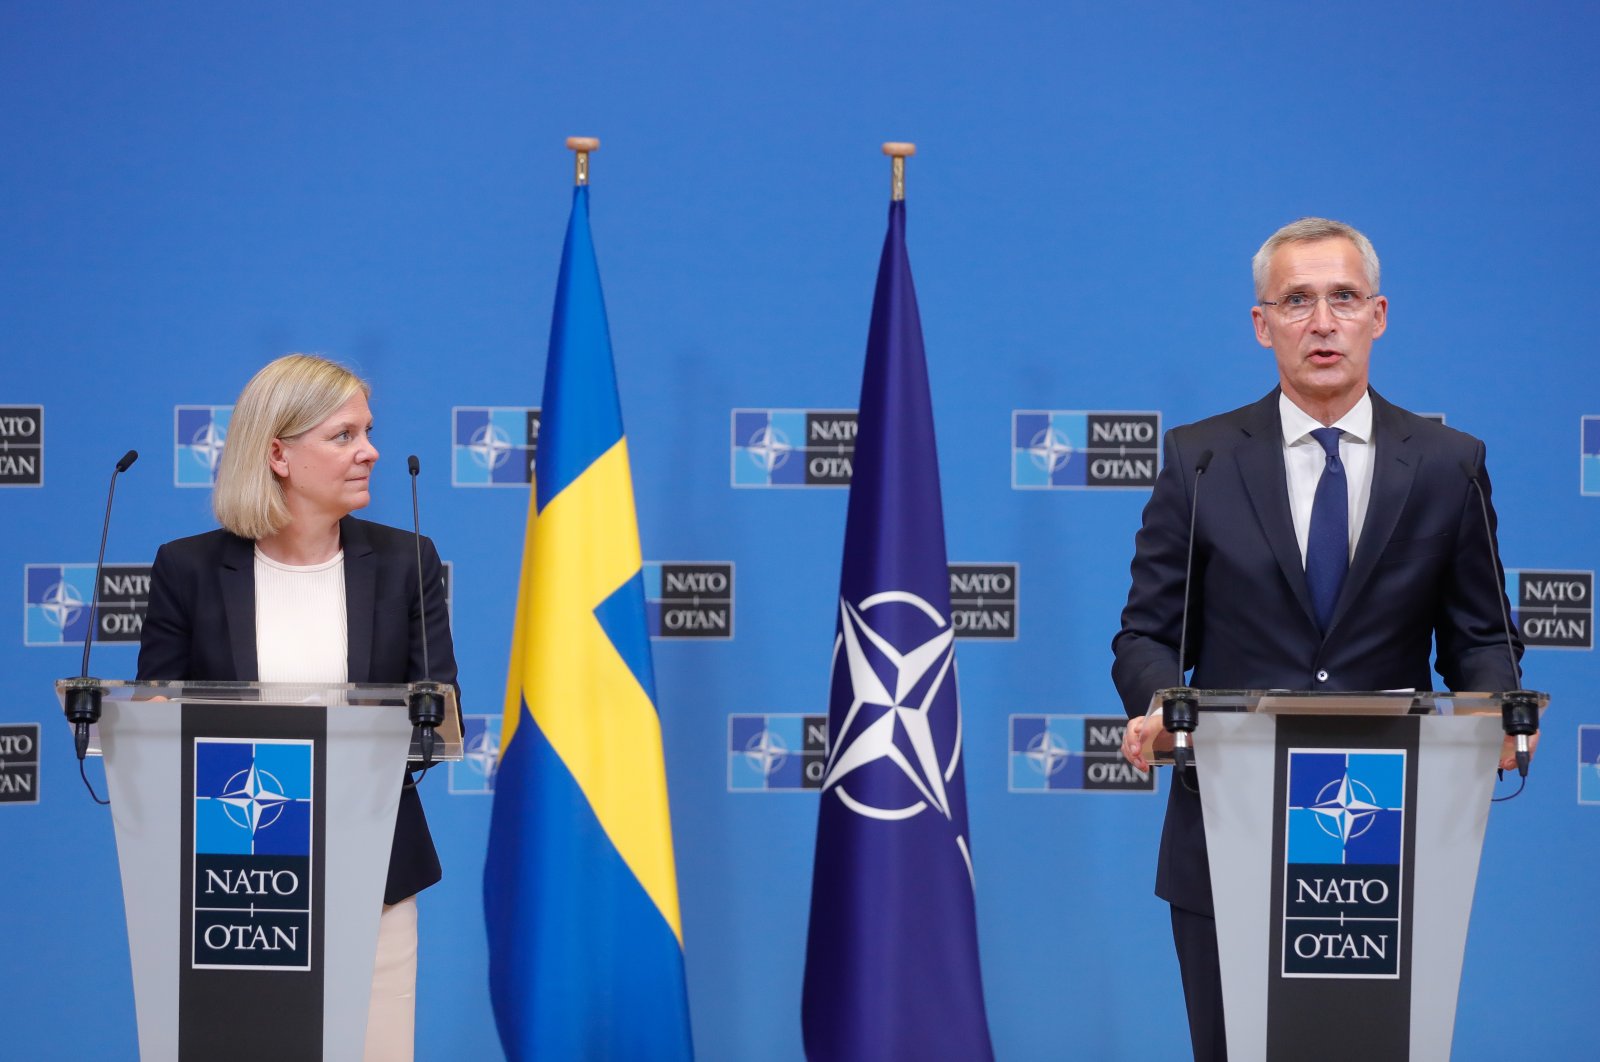 Sweden&#039;s Prime Minister Magdalena Andersson (L) and NATO Secretary-General Jens Stoltenberg give a joint press conference at the end of a meeting at NATO headquarters in Brussels, Belgium, June 27, 2022. (EPA Photo)